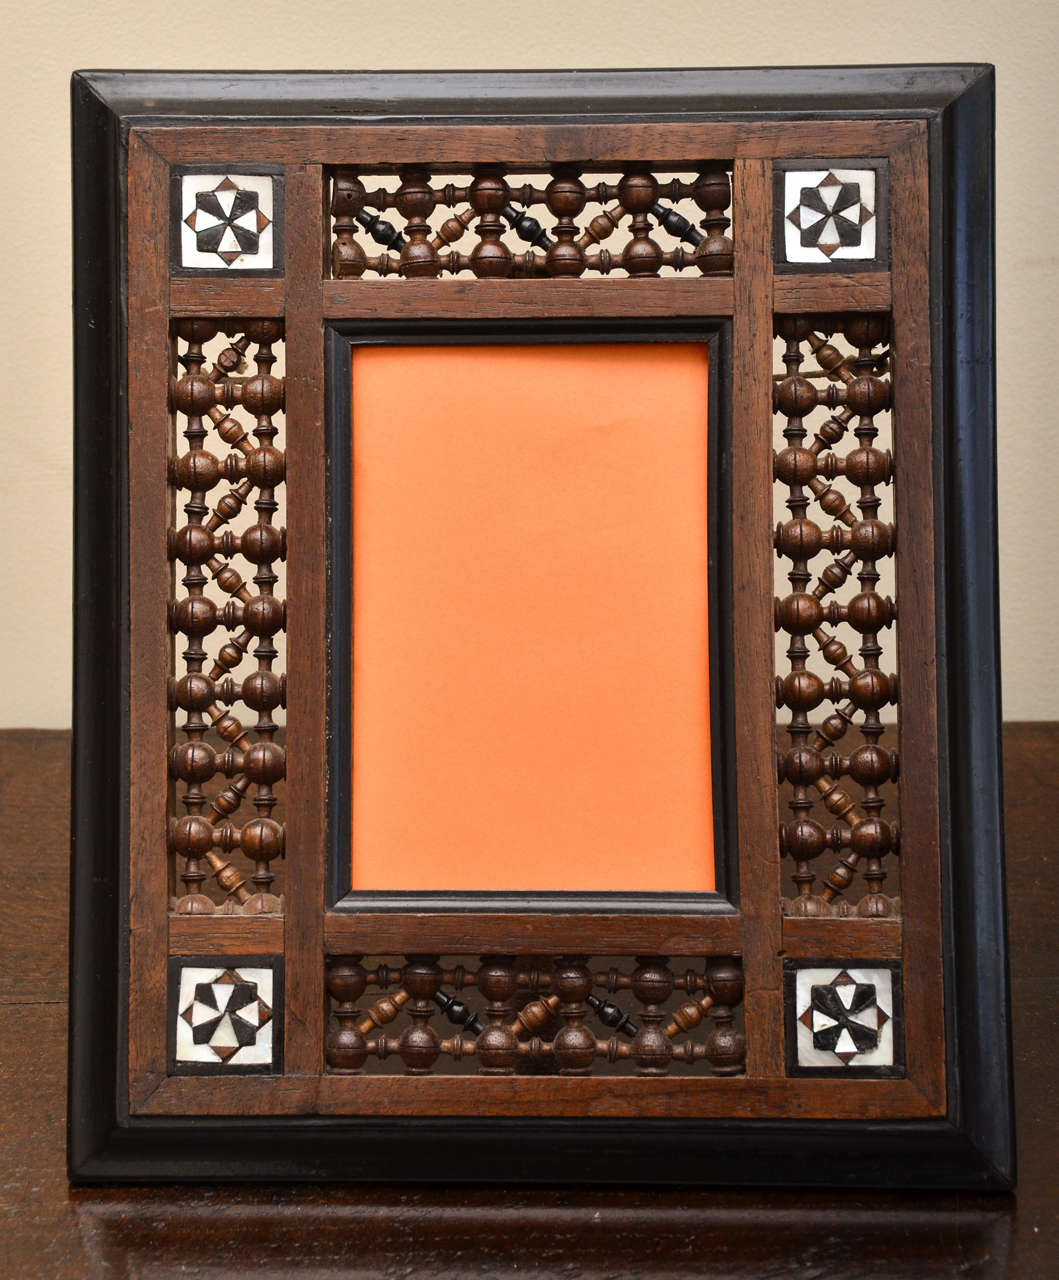 Pair Syrian Picture Frames With Turned Mashrabiya Panels Inlaid Sadeliwork ( Pieces Of Mother Of Pearl & Ebony Forming A Diamond & Star Pattern ) At The Corners. Very Decorative -- Great For Photo's. Interior Dimensions 4.5